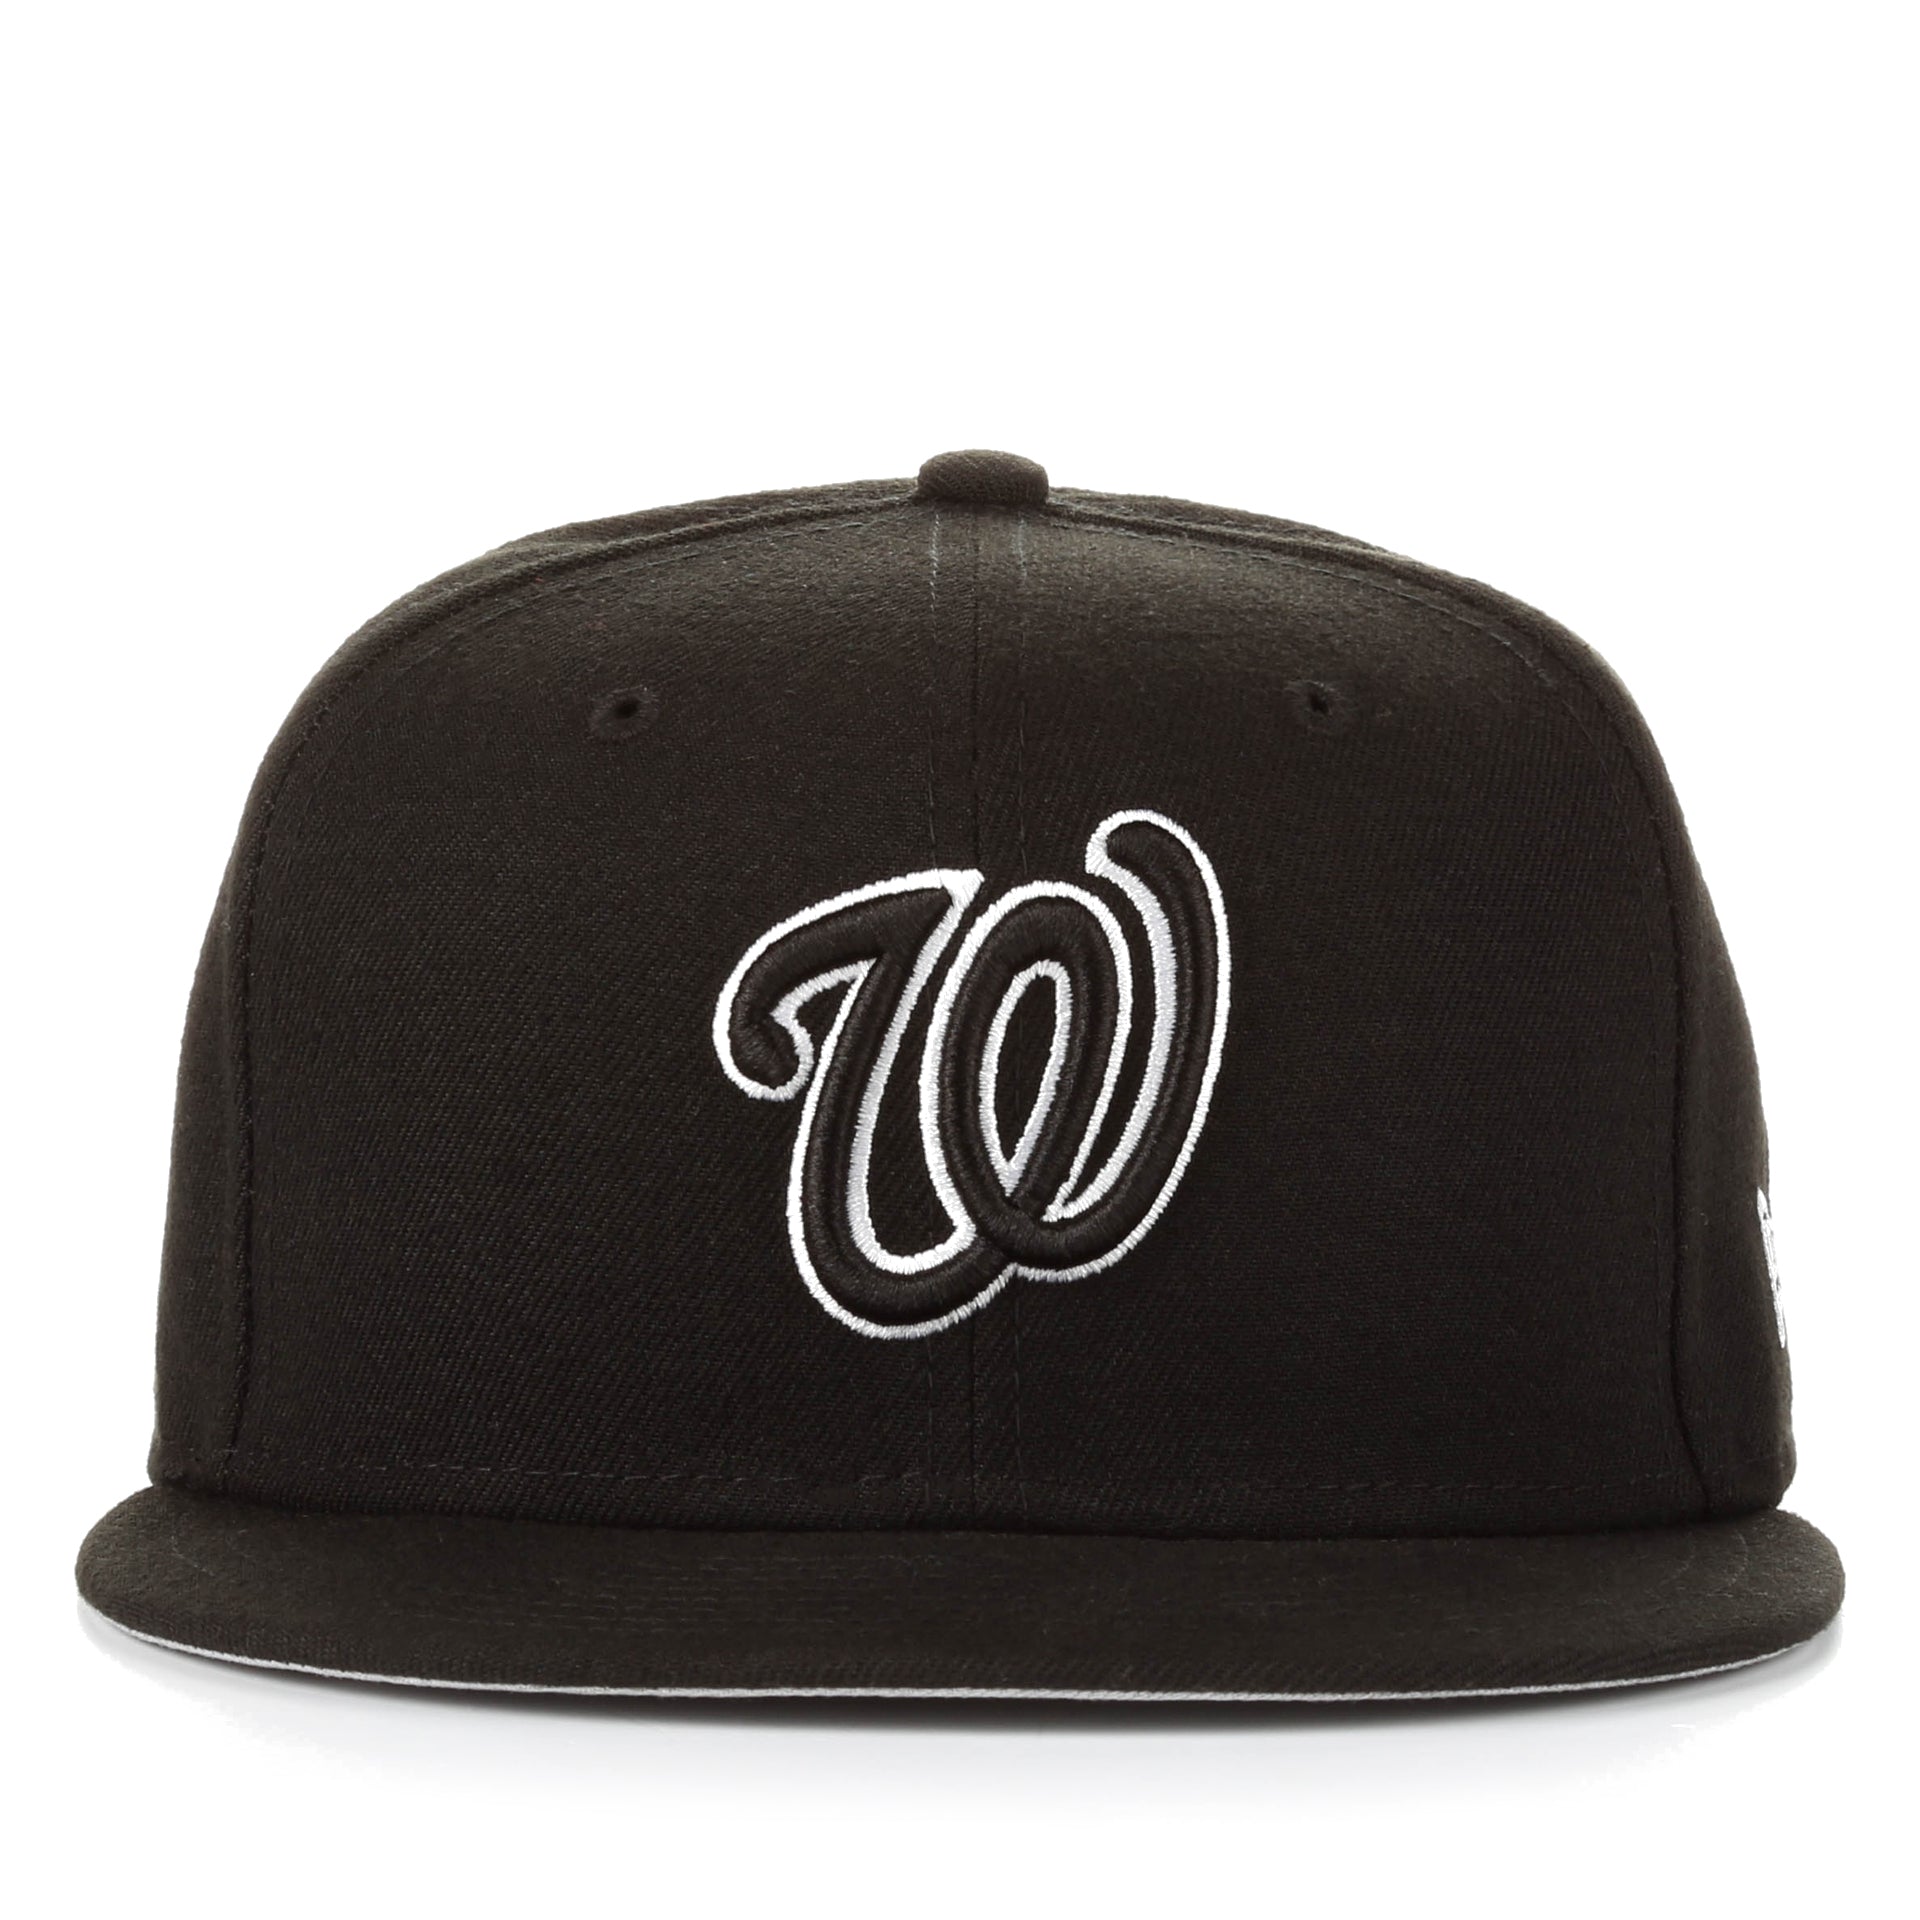 Era 59Fifty League Fitted Cap - Washington Nationals/Black - New